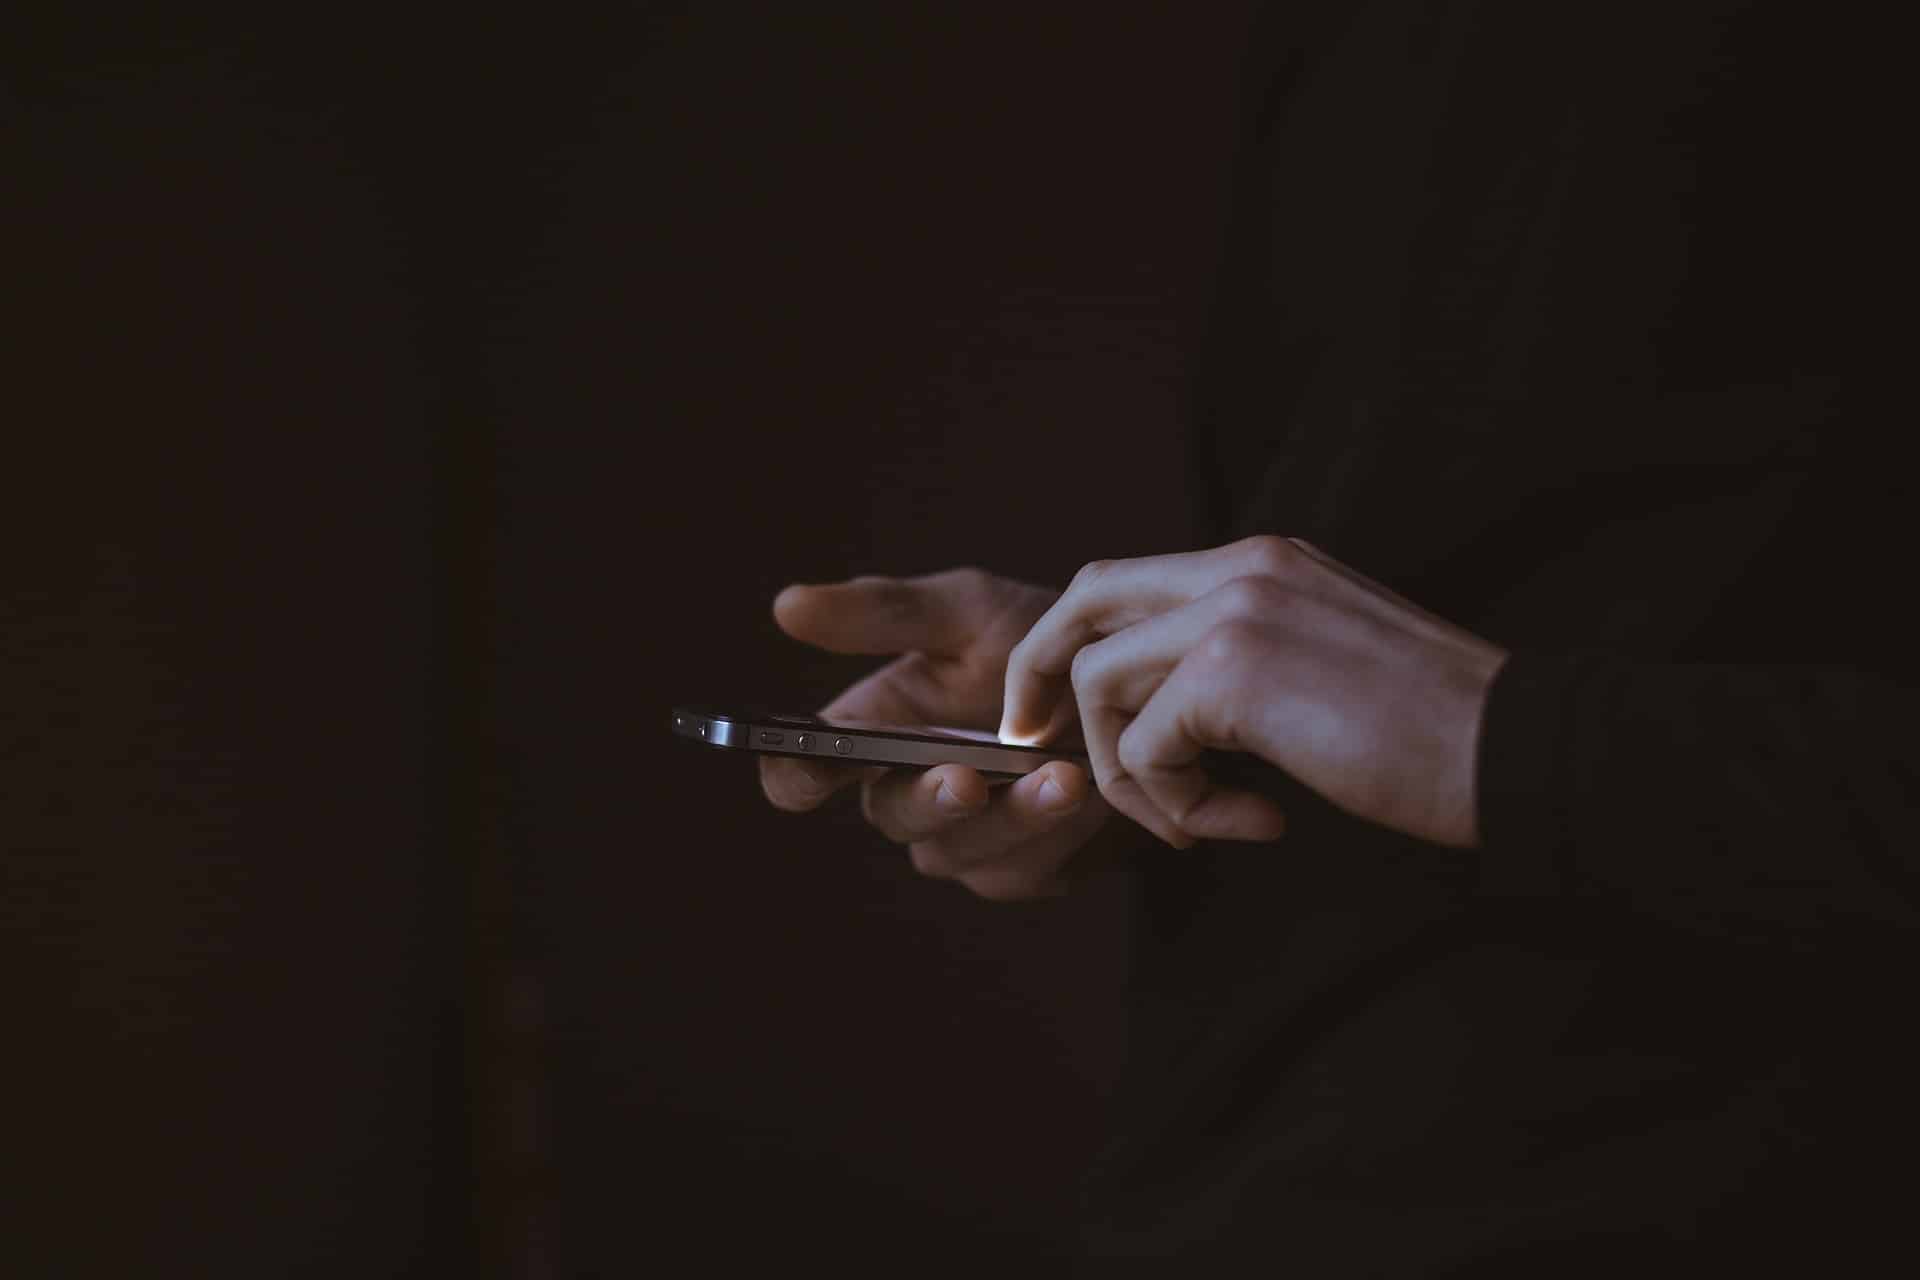 Closeup view of a pair of hands using a smartphone